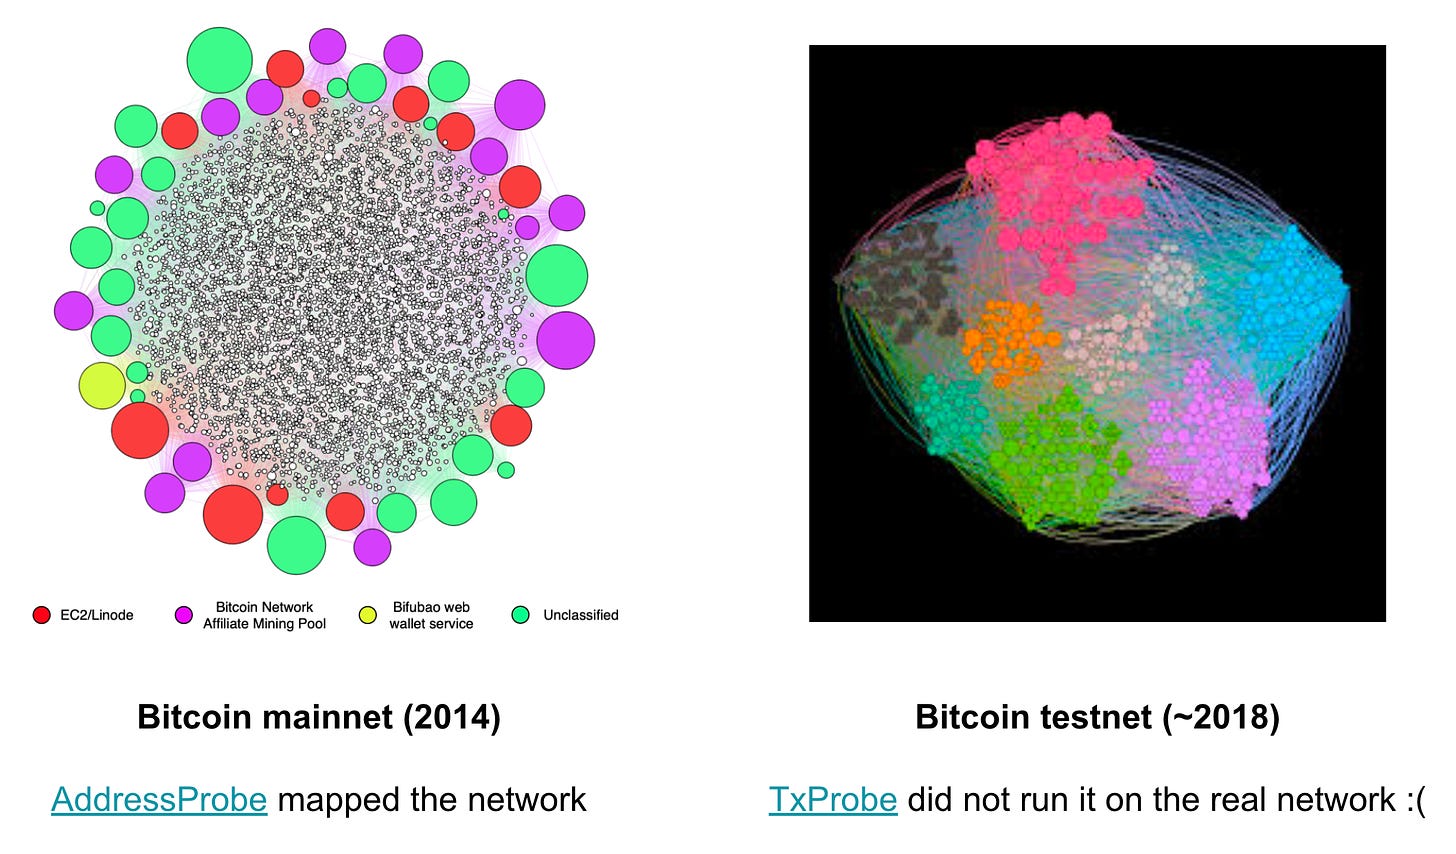 Historical attempts at mapping Bitcoin's topology